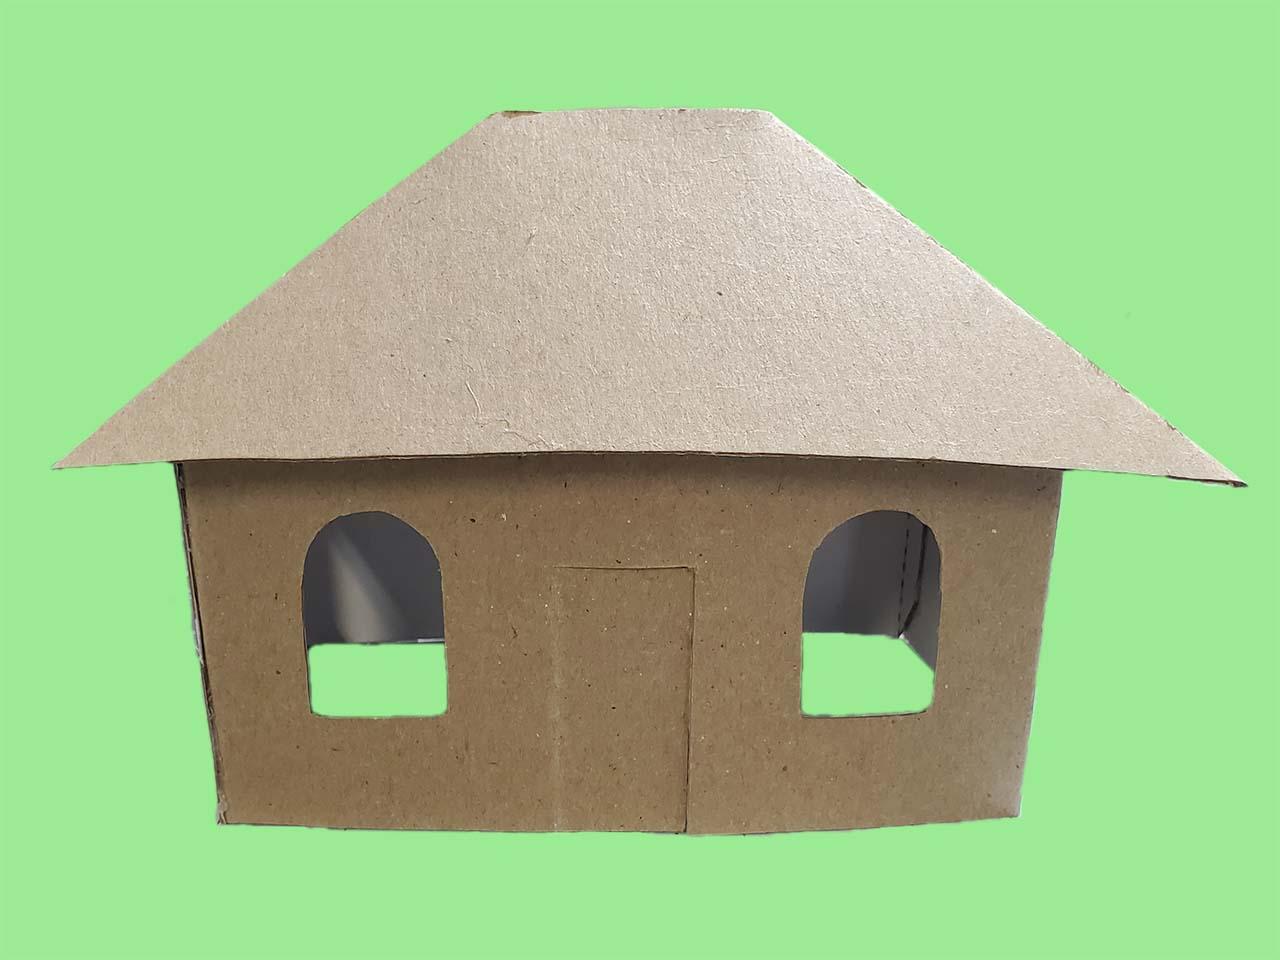 How to Make a Cardboard House with Printable Template